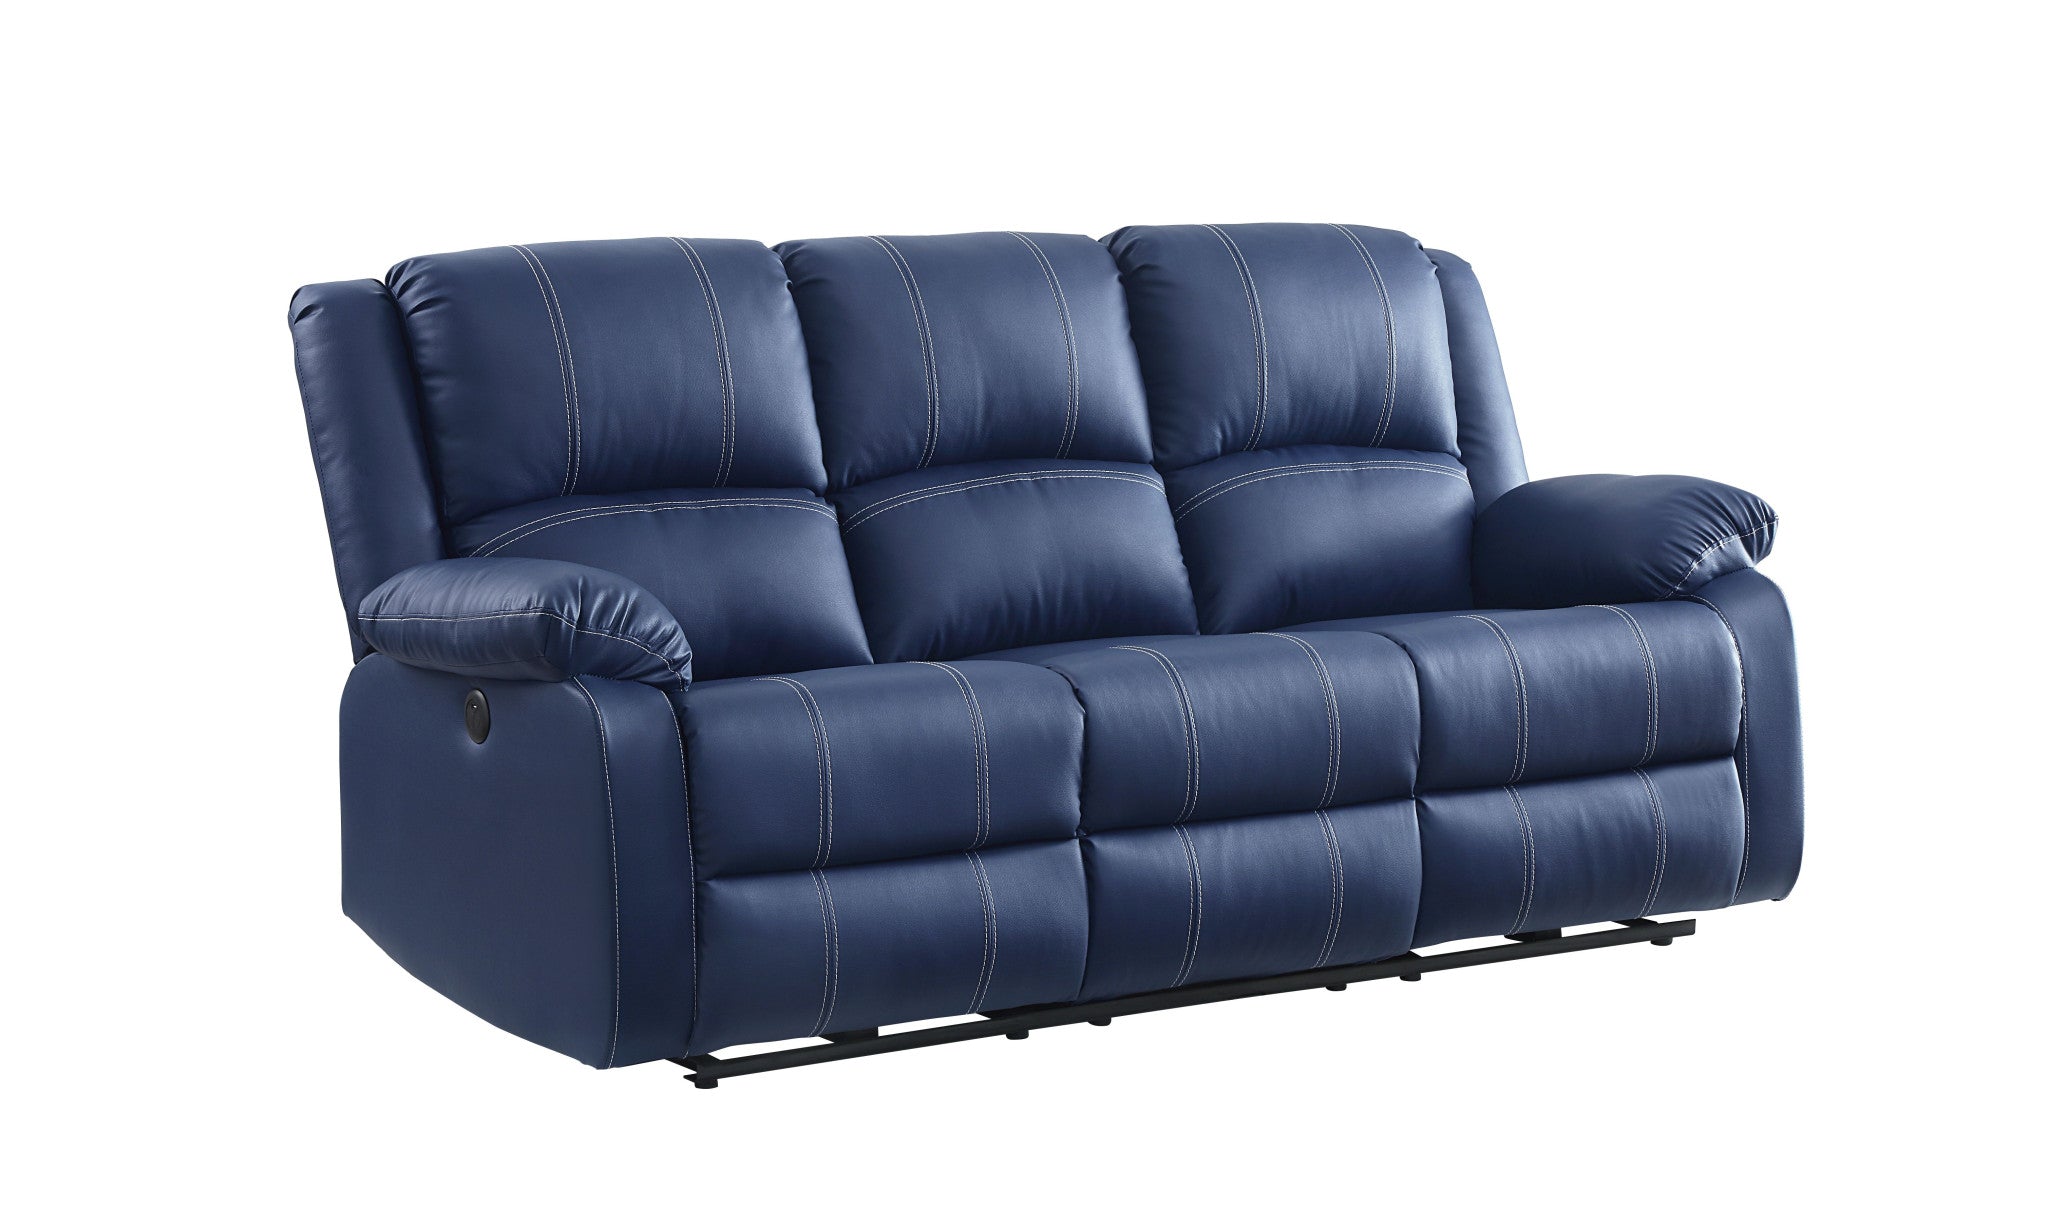 81" Blue And Black Faux Leather Reclining USB Sofa